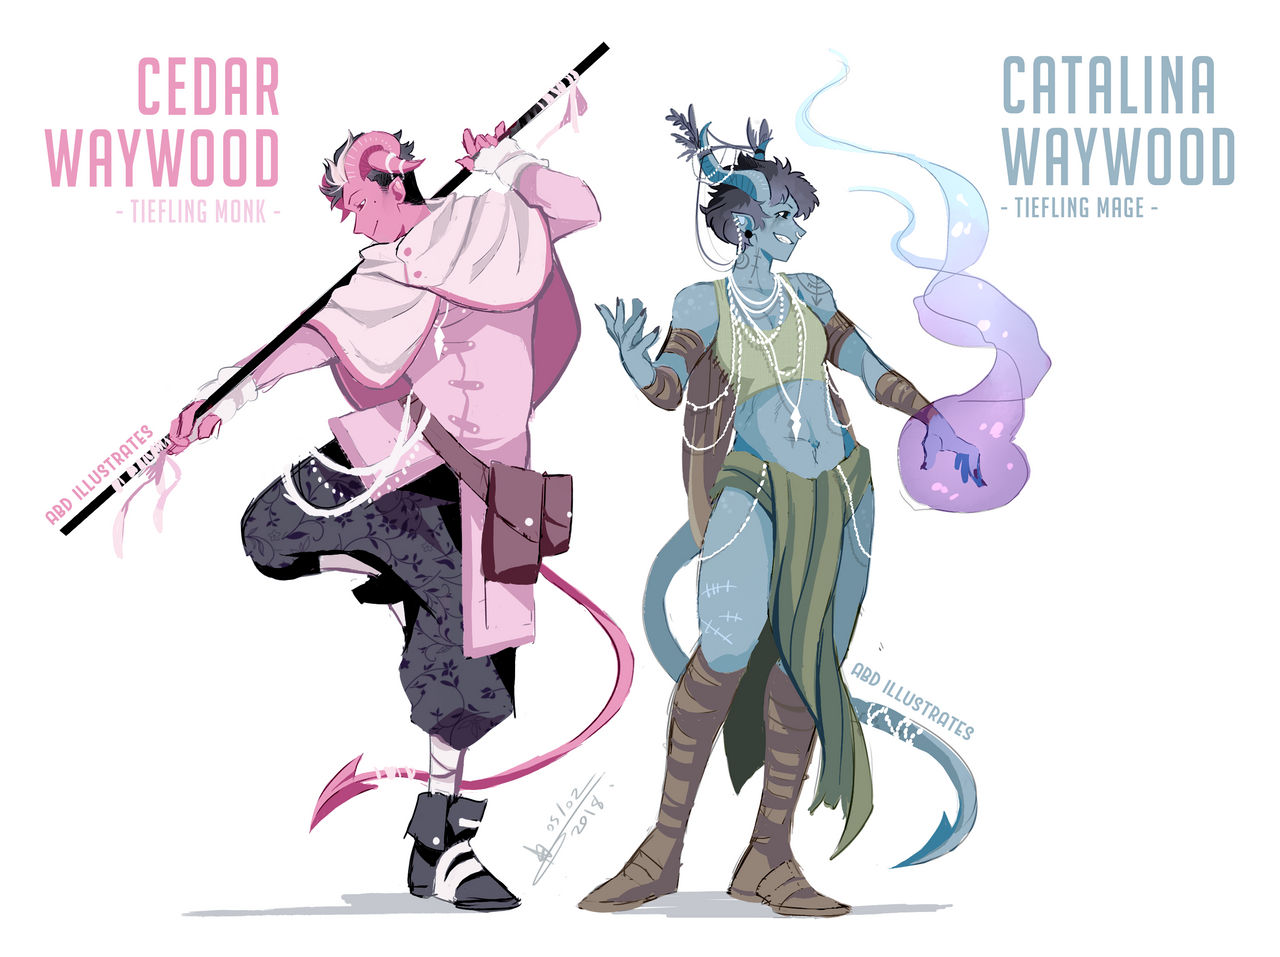 DnD Character Designs: the Waywood Siblings by ABD-illustrates on